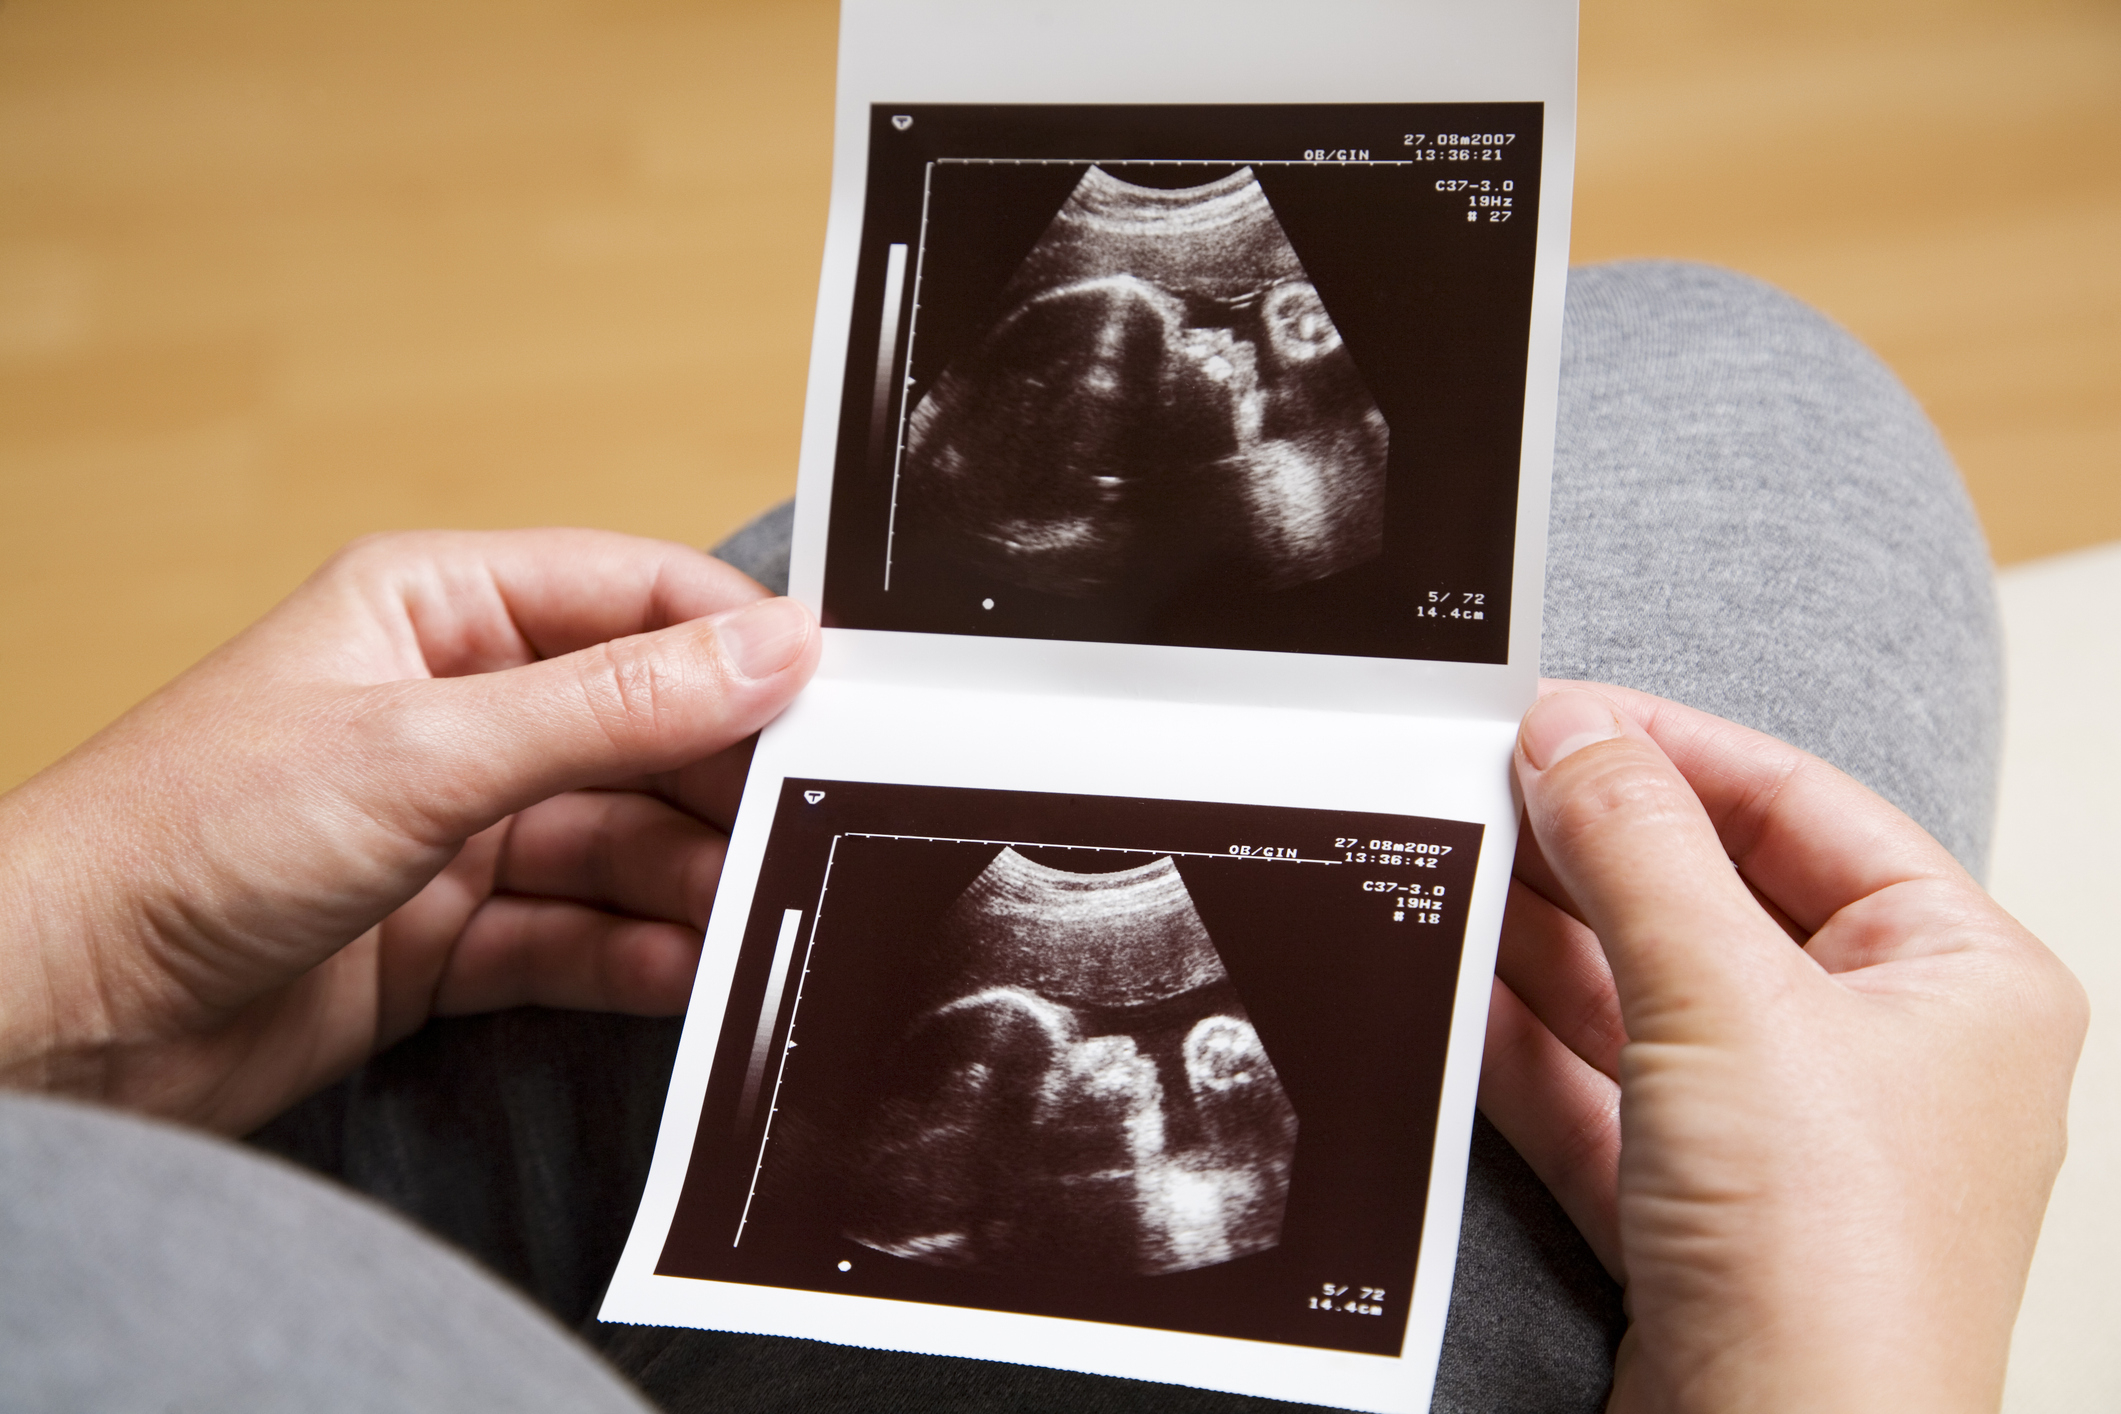 Person holding ultrasound photographs, likely suggesting pregnancy